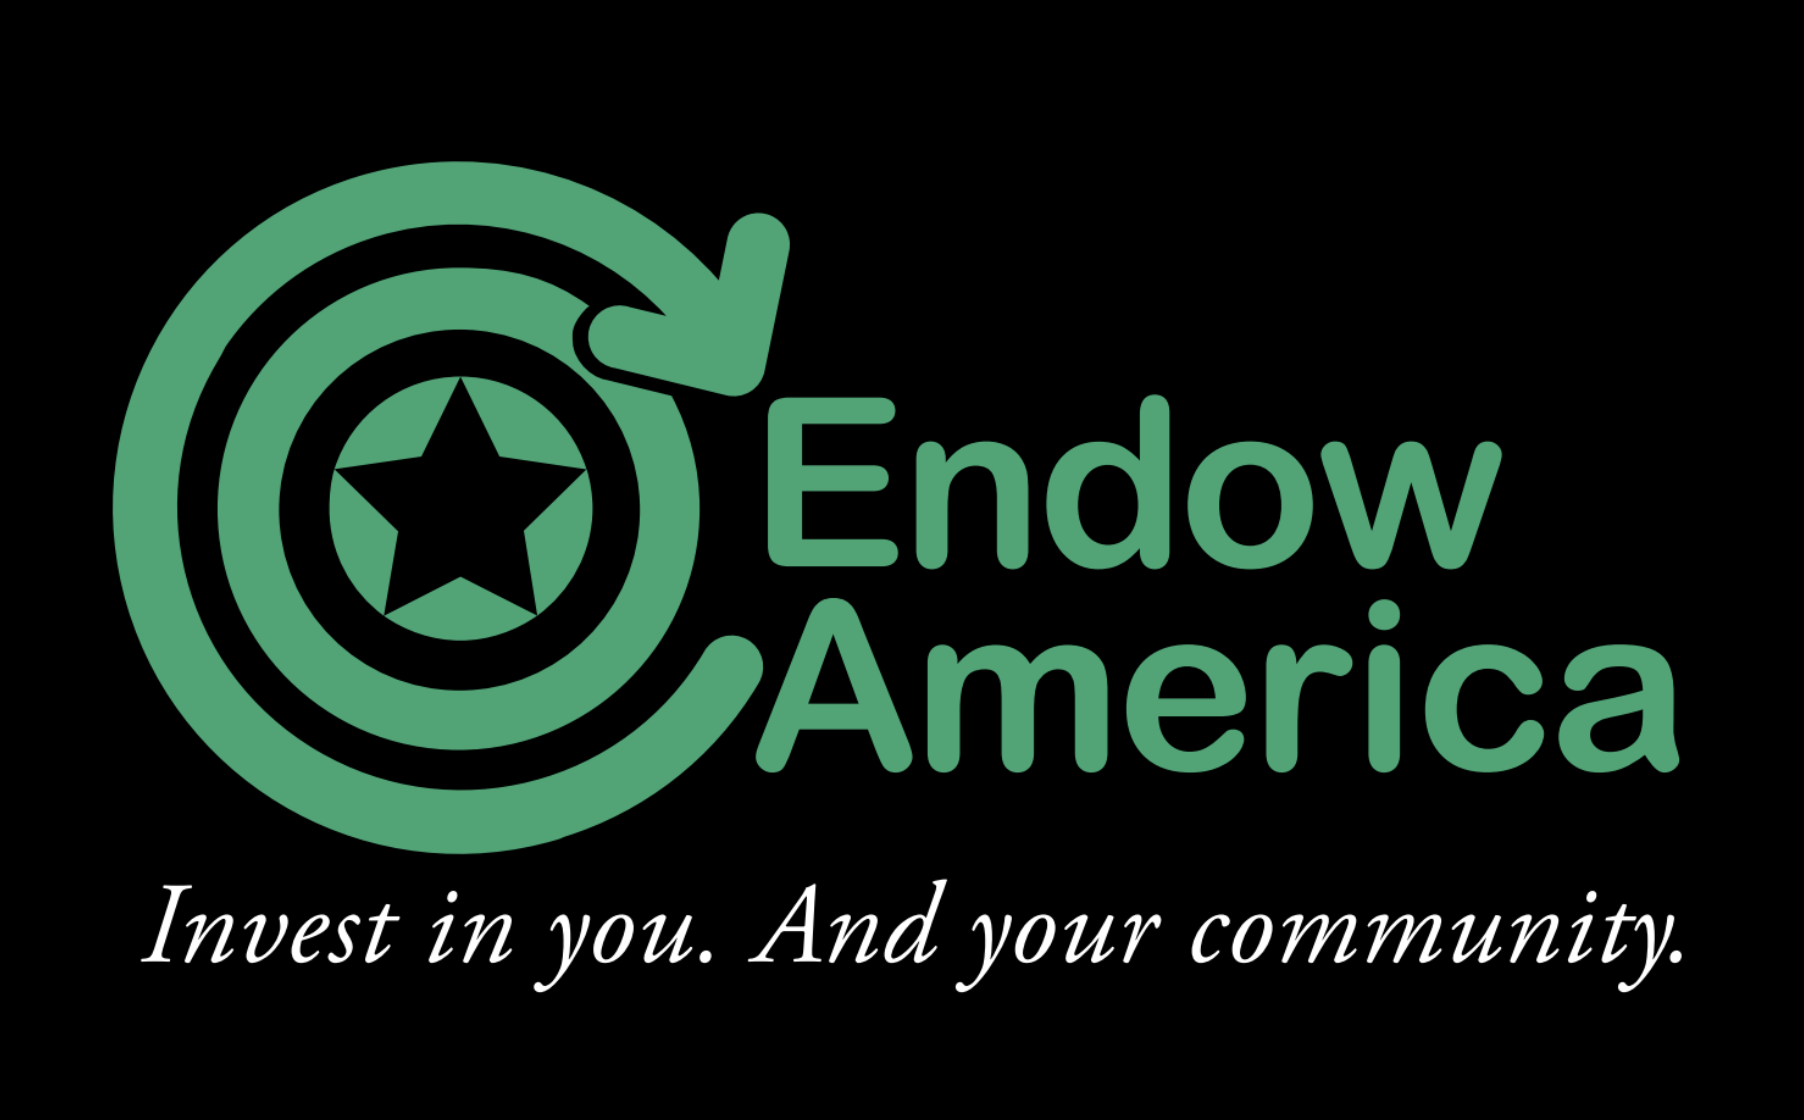 Endow America chooses Debi Gasper, CEO/Creative Director, The AD Agency to design and produce their new brand identity and logo.